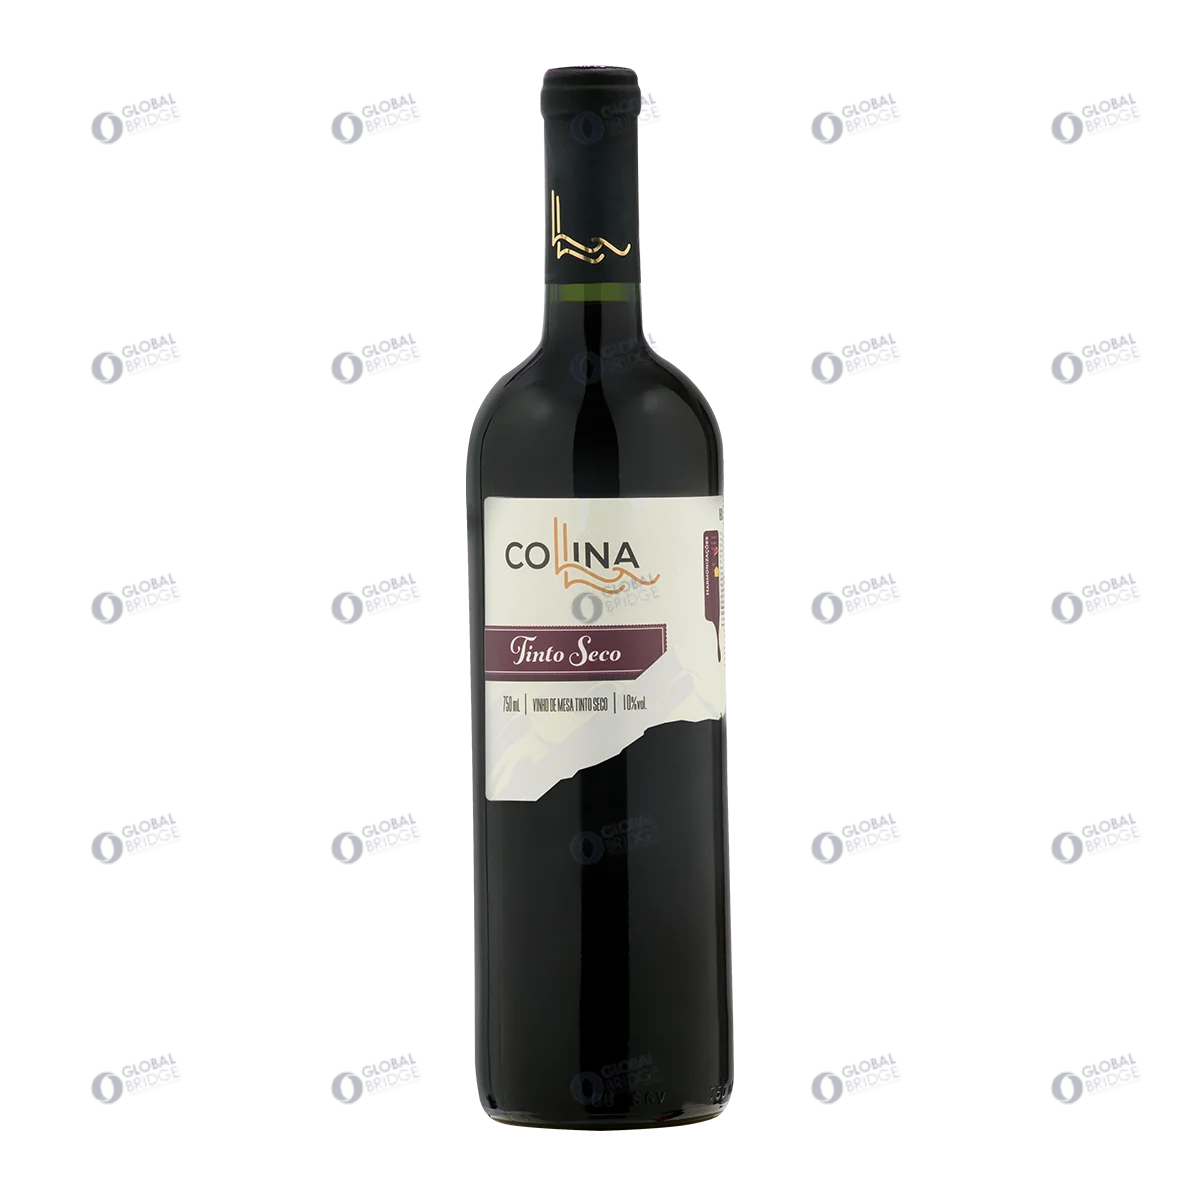 
Red Wine Dry Collina Made in Brazil 750 ml Bottle American Grapes Winemaking Drink Alcoholic Beverage Food Beverage Health Wine  (1600144198637)